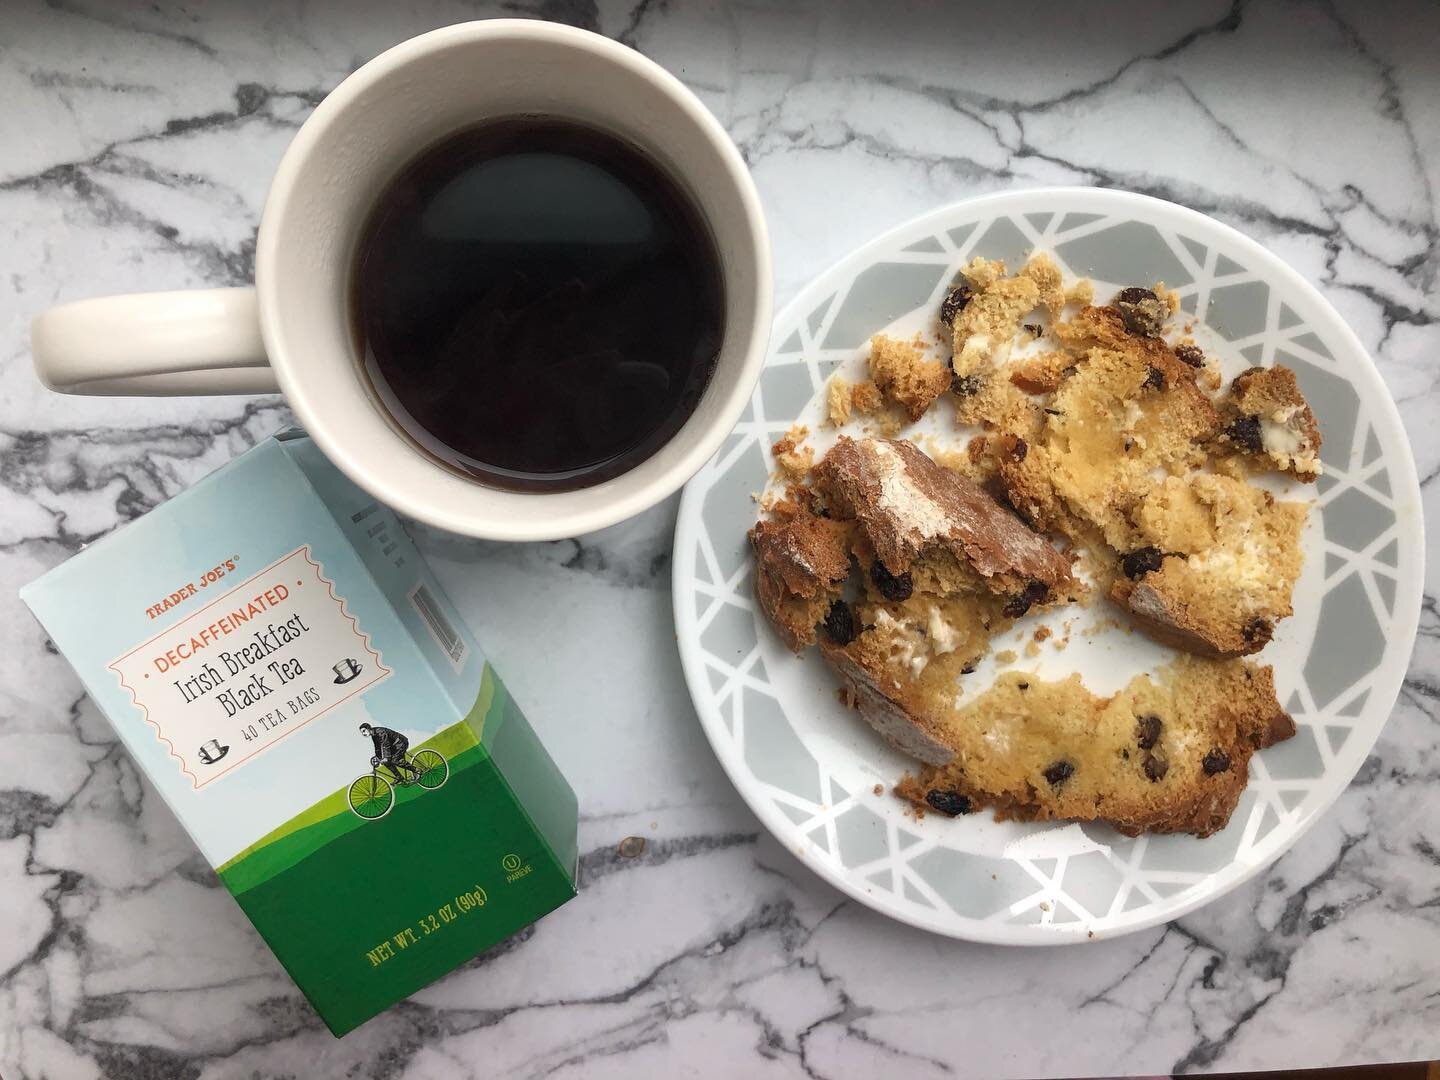 Happy St. PaTEAs Day! (please ignore my badly cut Irish soda bread 😂)
St. Patrick&rsquo;s Day is one of my favorite holidays. My mom&rsquo;s mother was Irish, but much more of my family is Italian so I always felt more connected to that part of my c